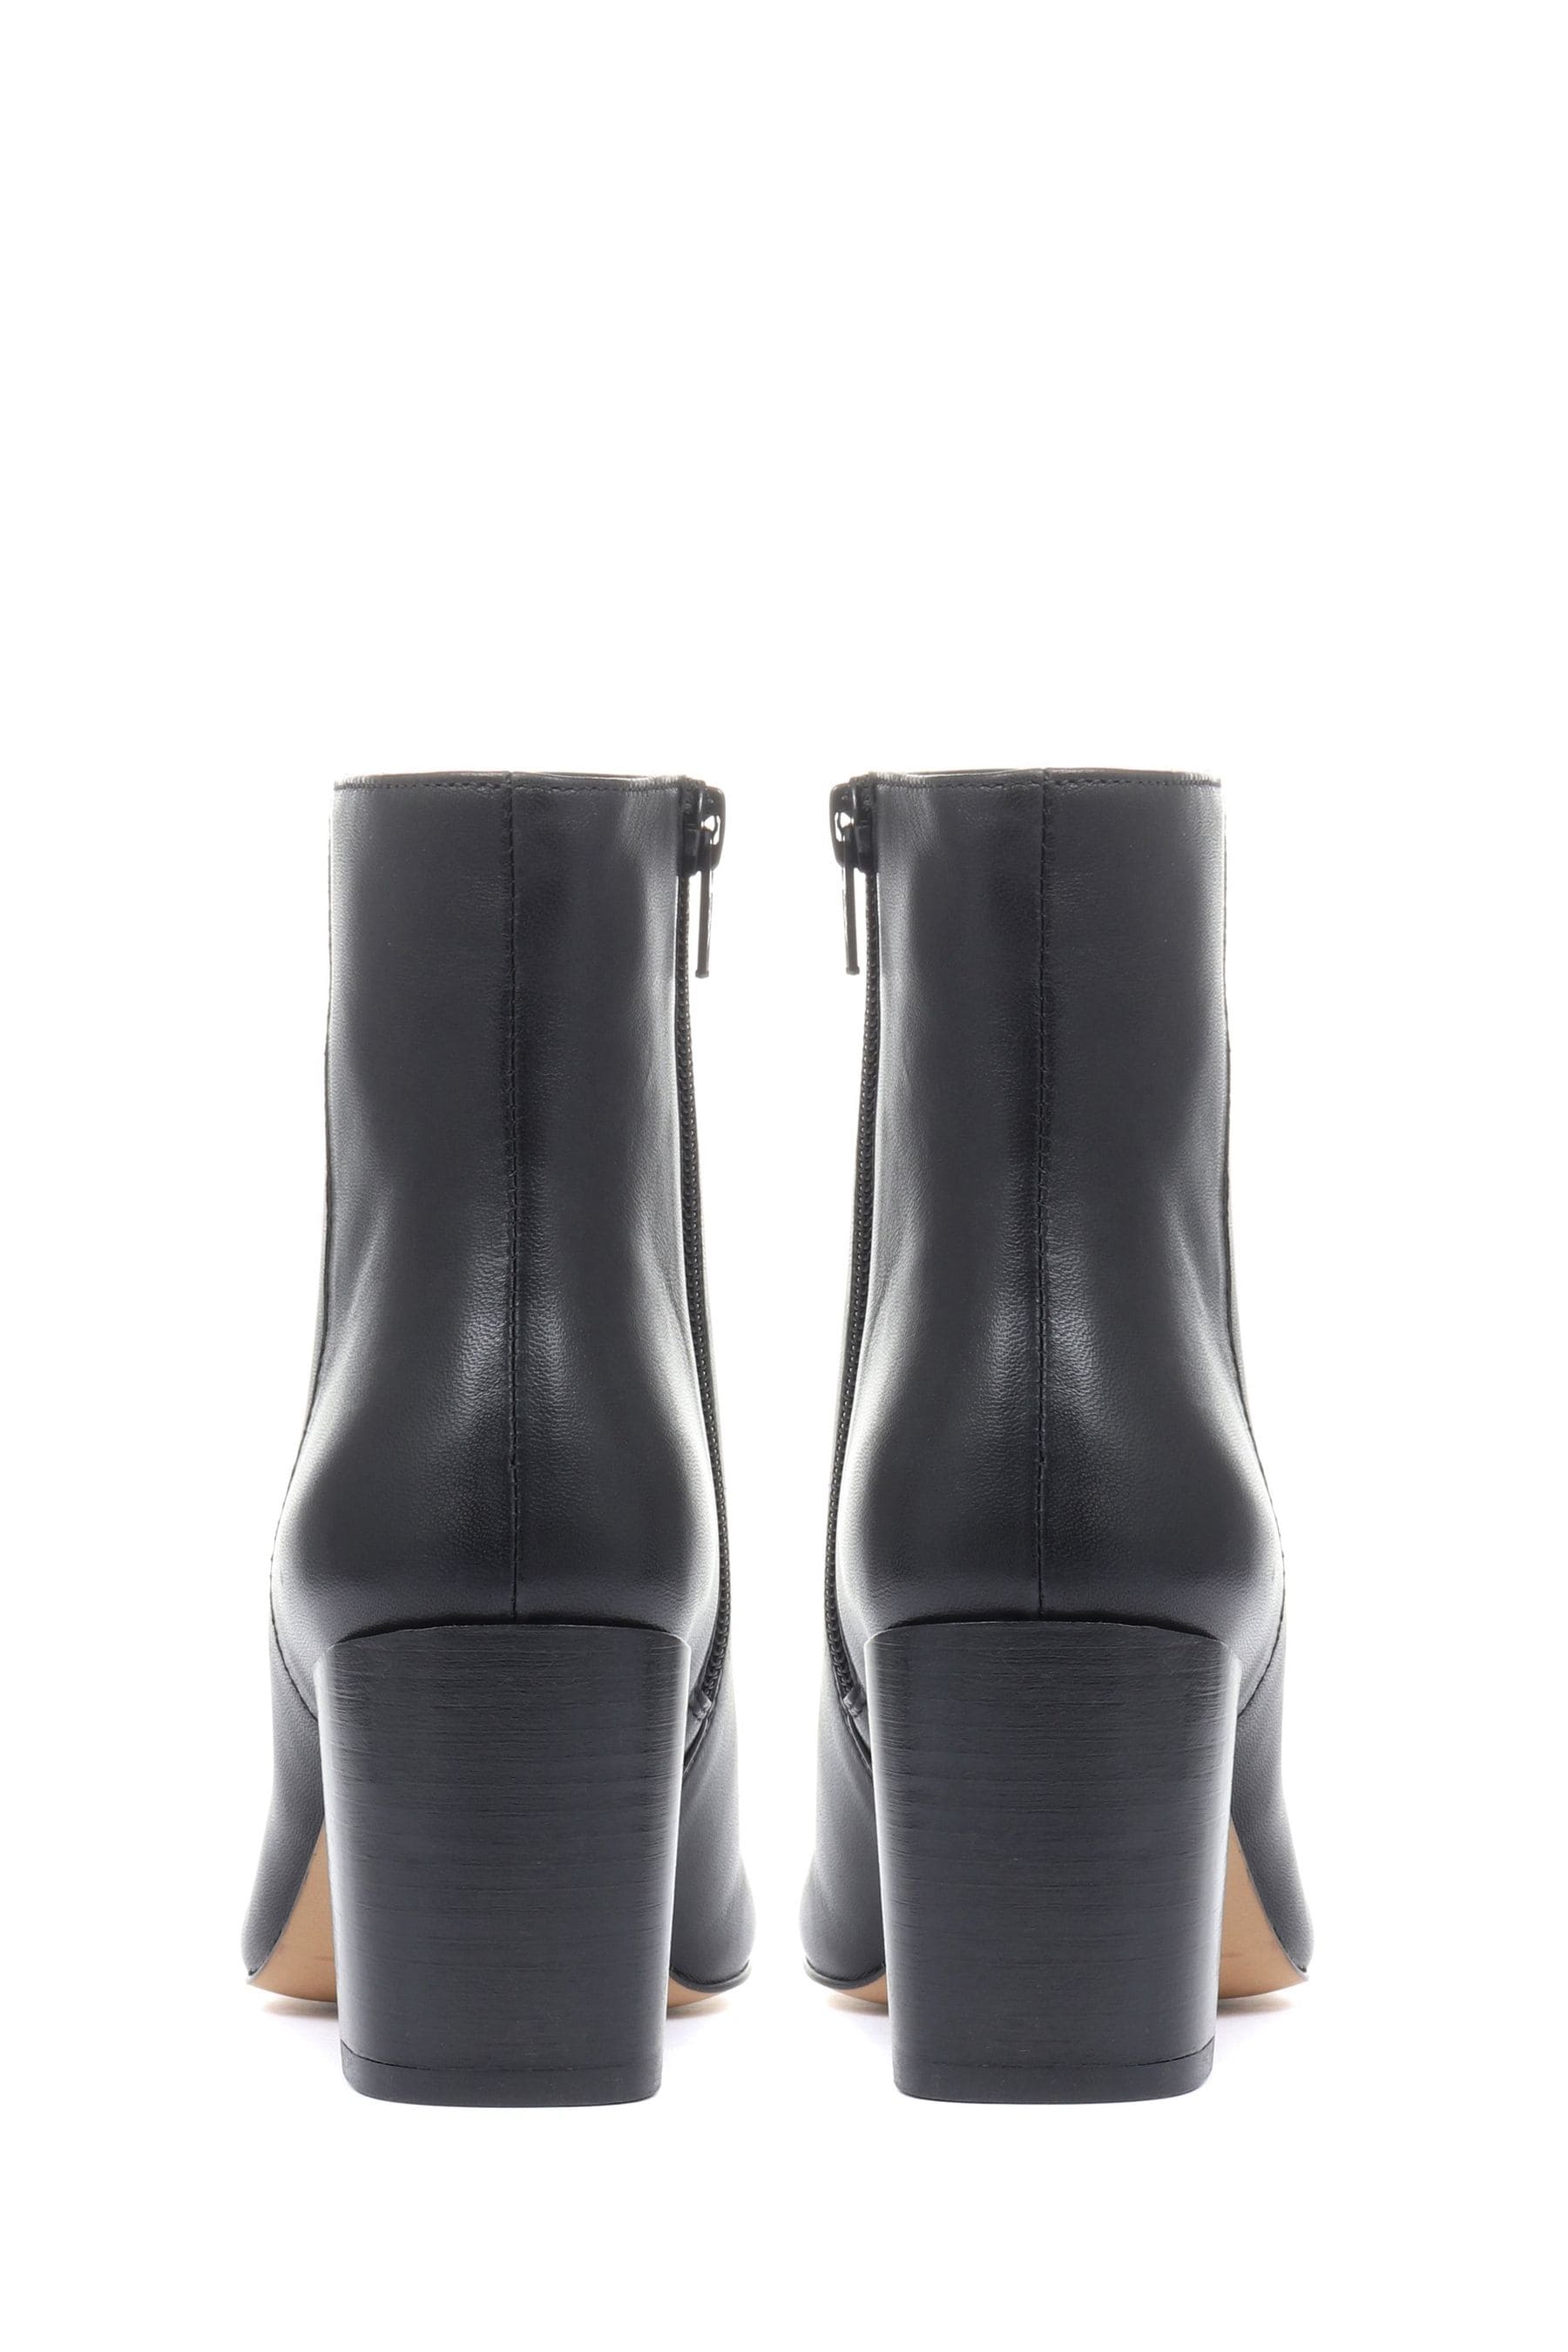 Buy Jones Bootmaker Neptune Leather Heeled Ankle Boots from the Next UK ...